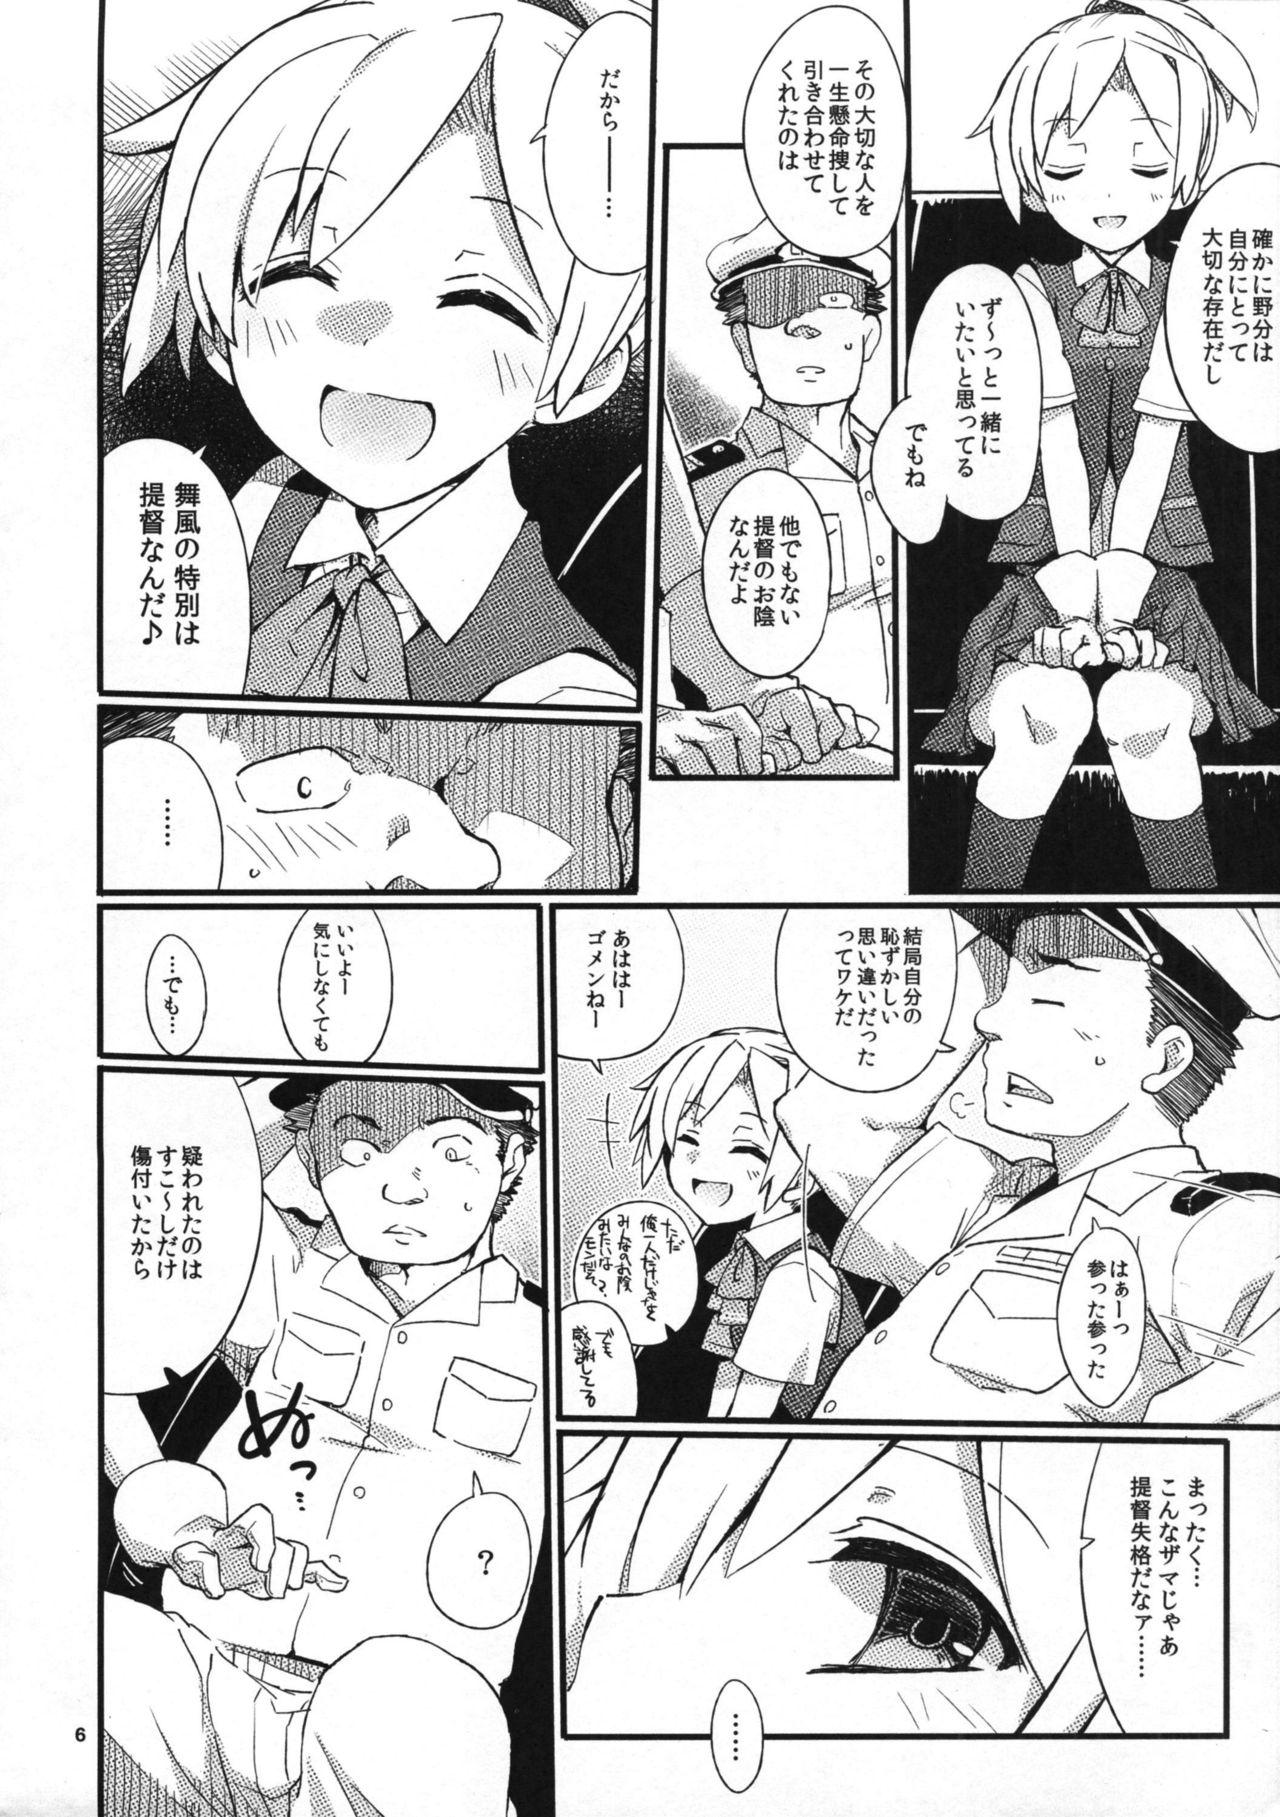 Twink D3!!! - Kantai collection Family Sex - Page 5